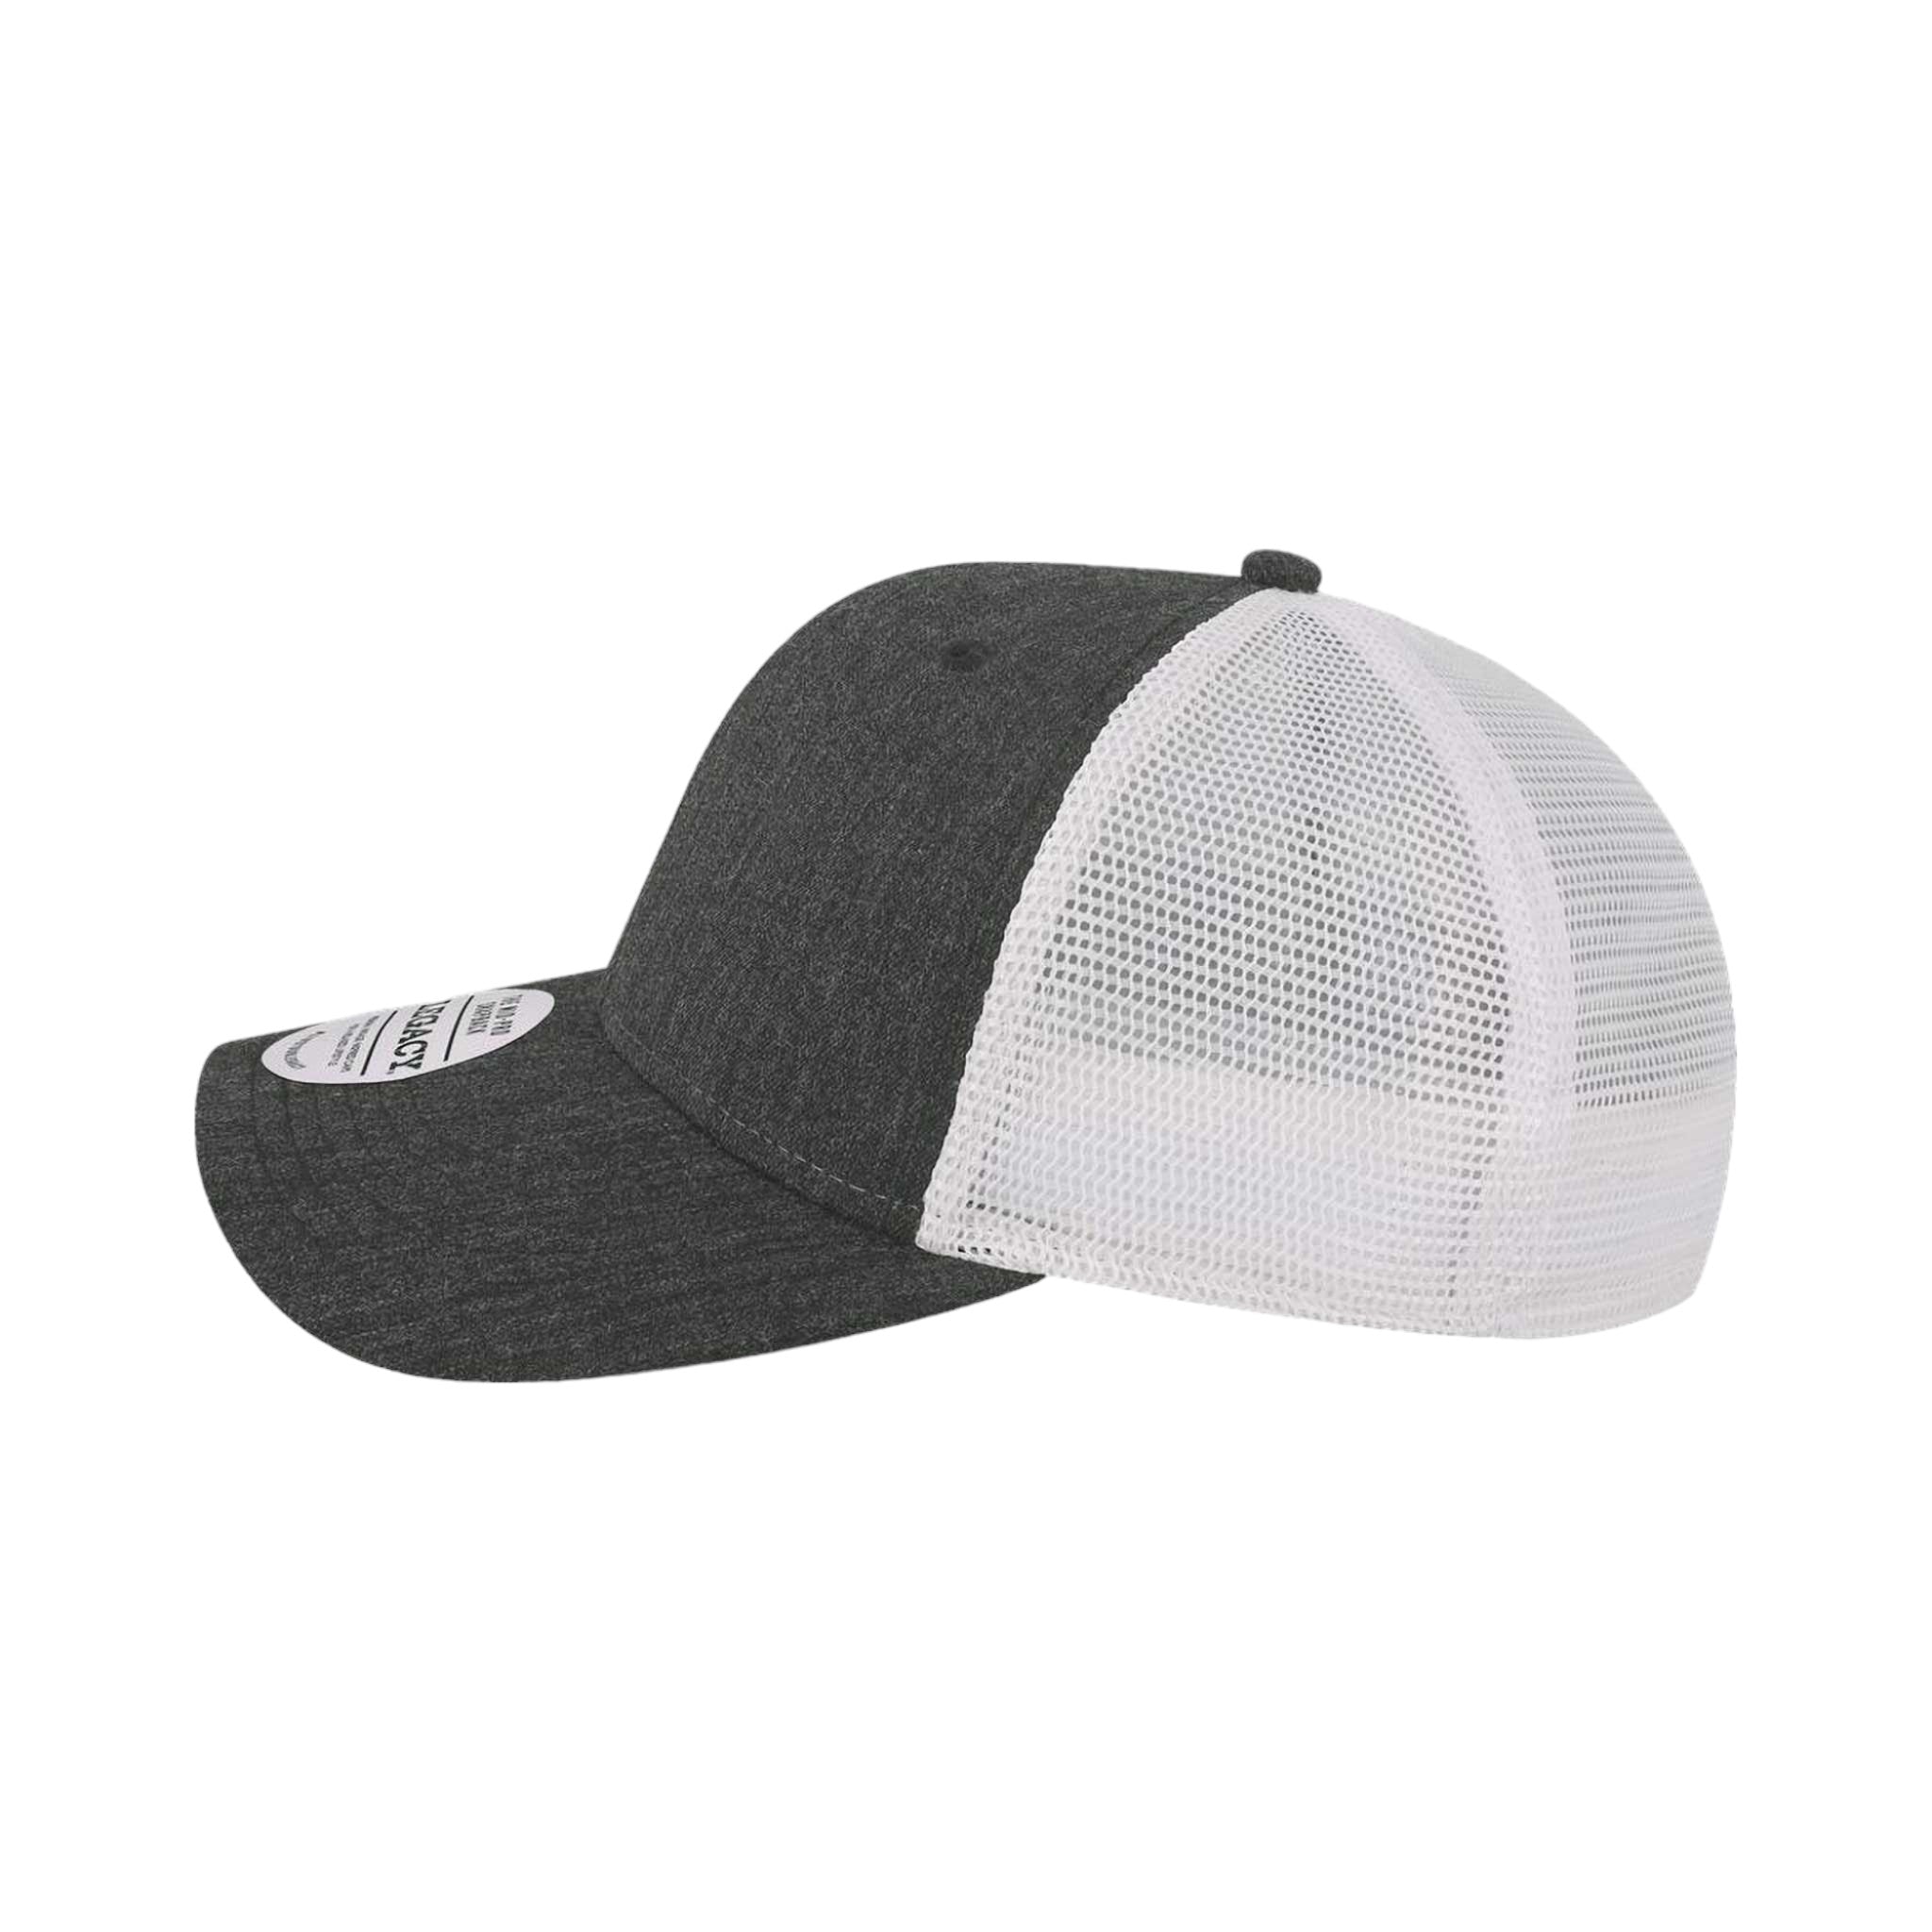 Side view of LEGACY MPS custom hat in mélange black and white